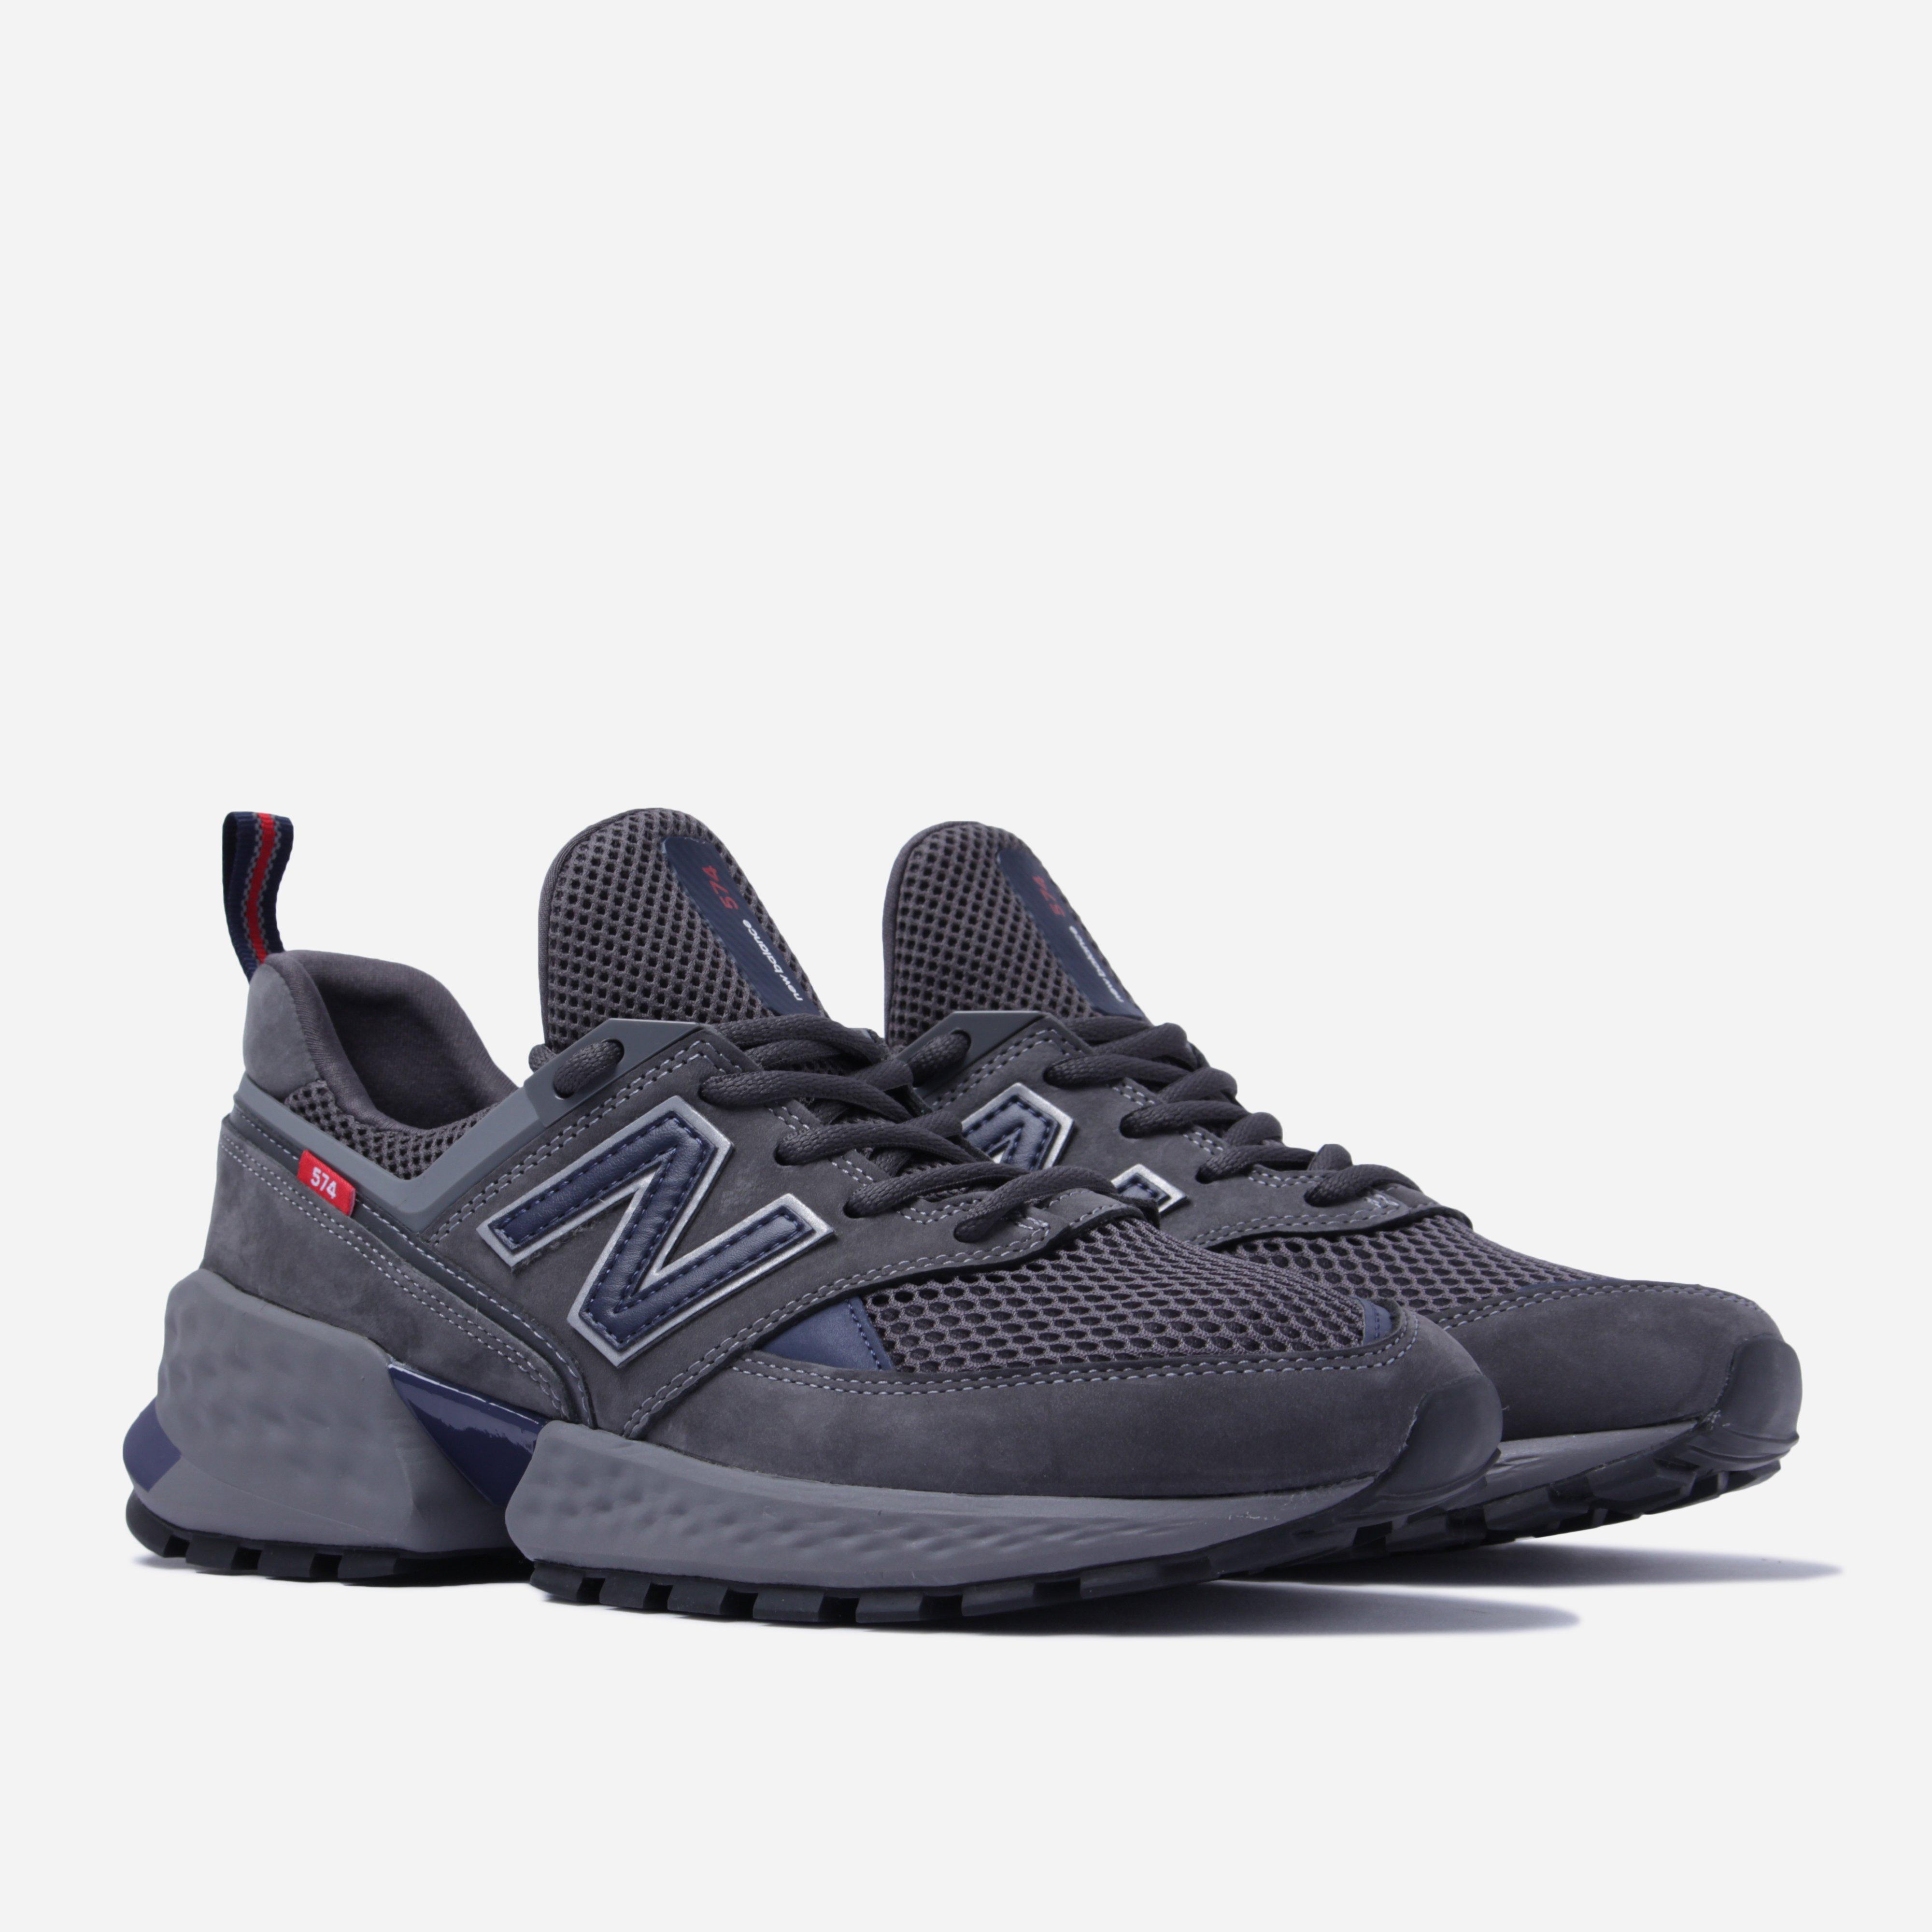 New Balance Ms 574 Edn in Grey (Gray) for Men - Lyst